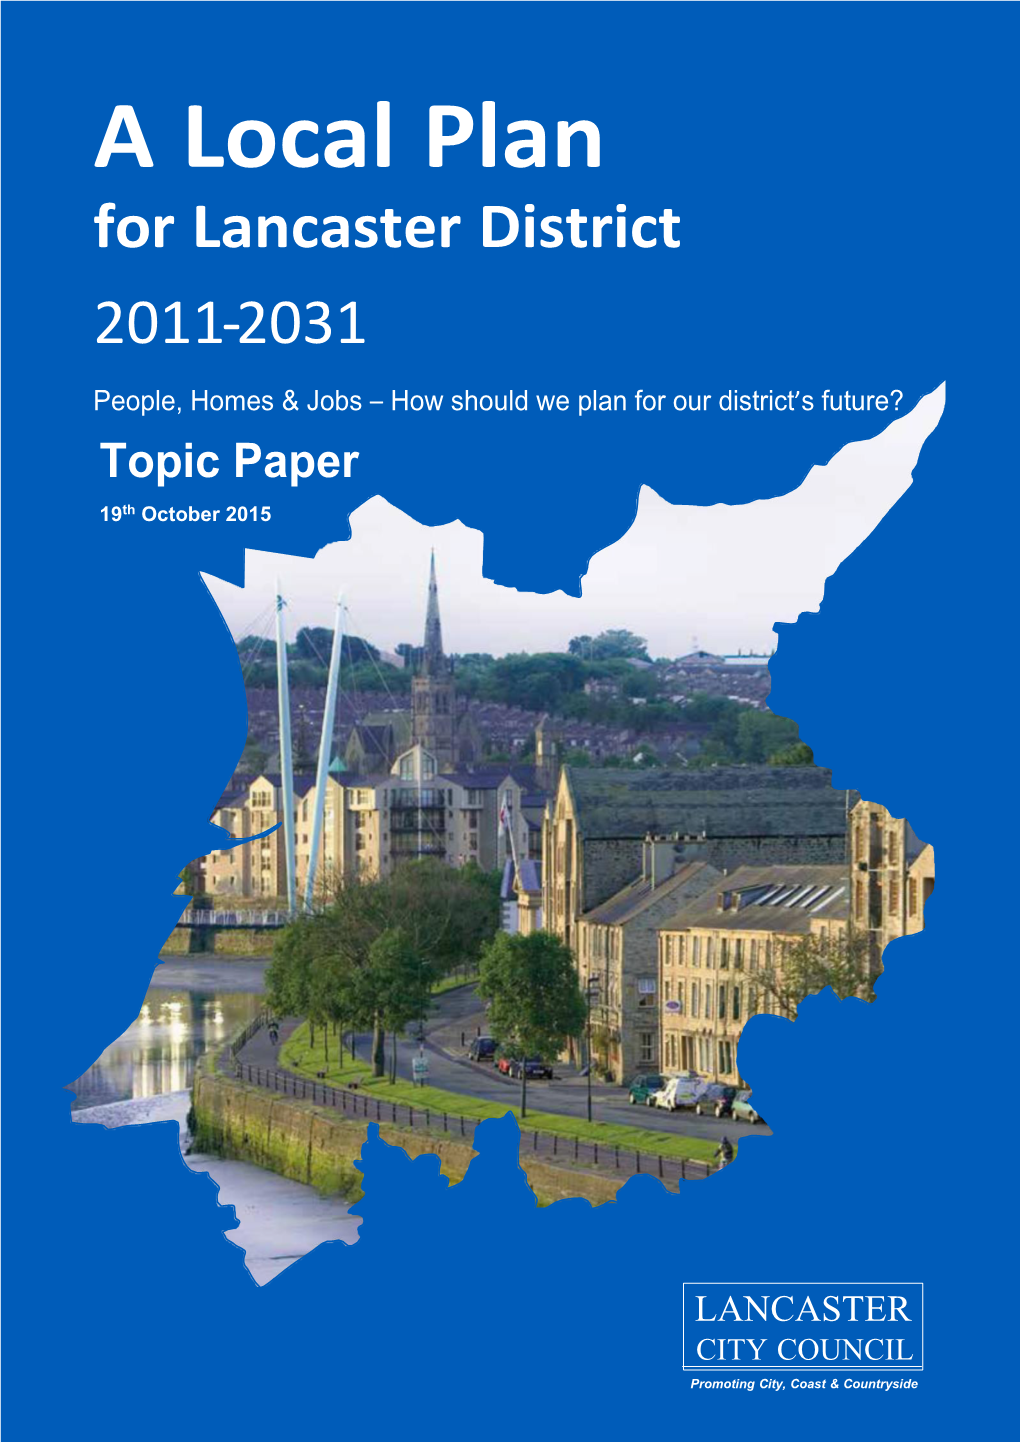 A Local Plan for Lancaster District 2011-2031